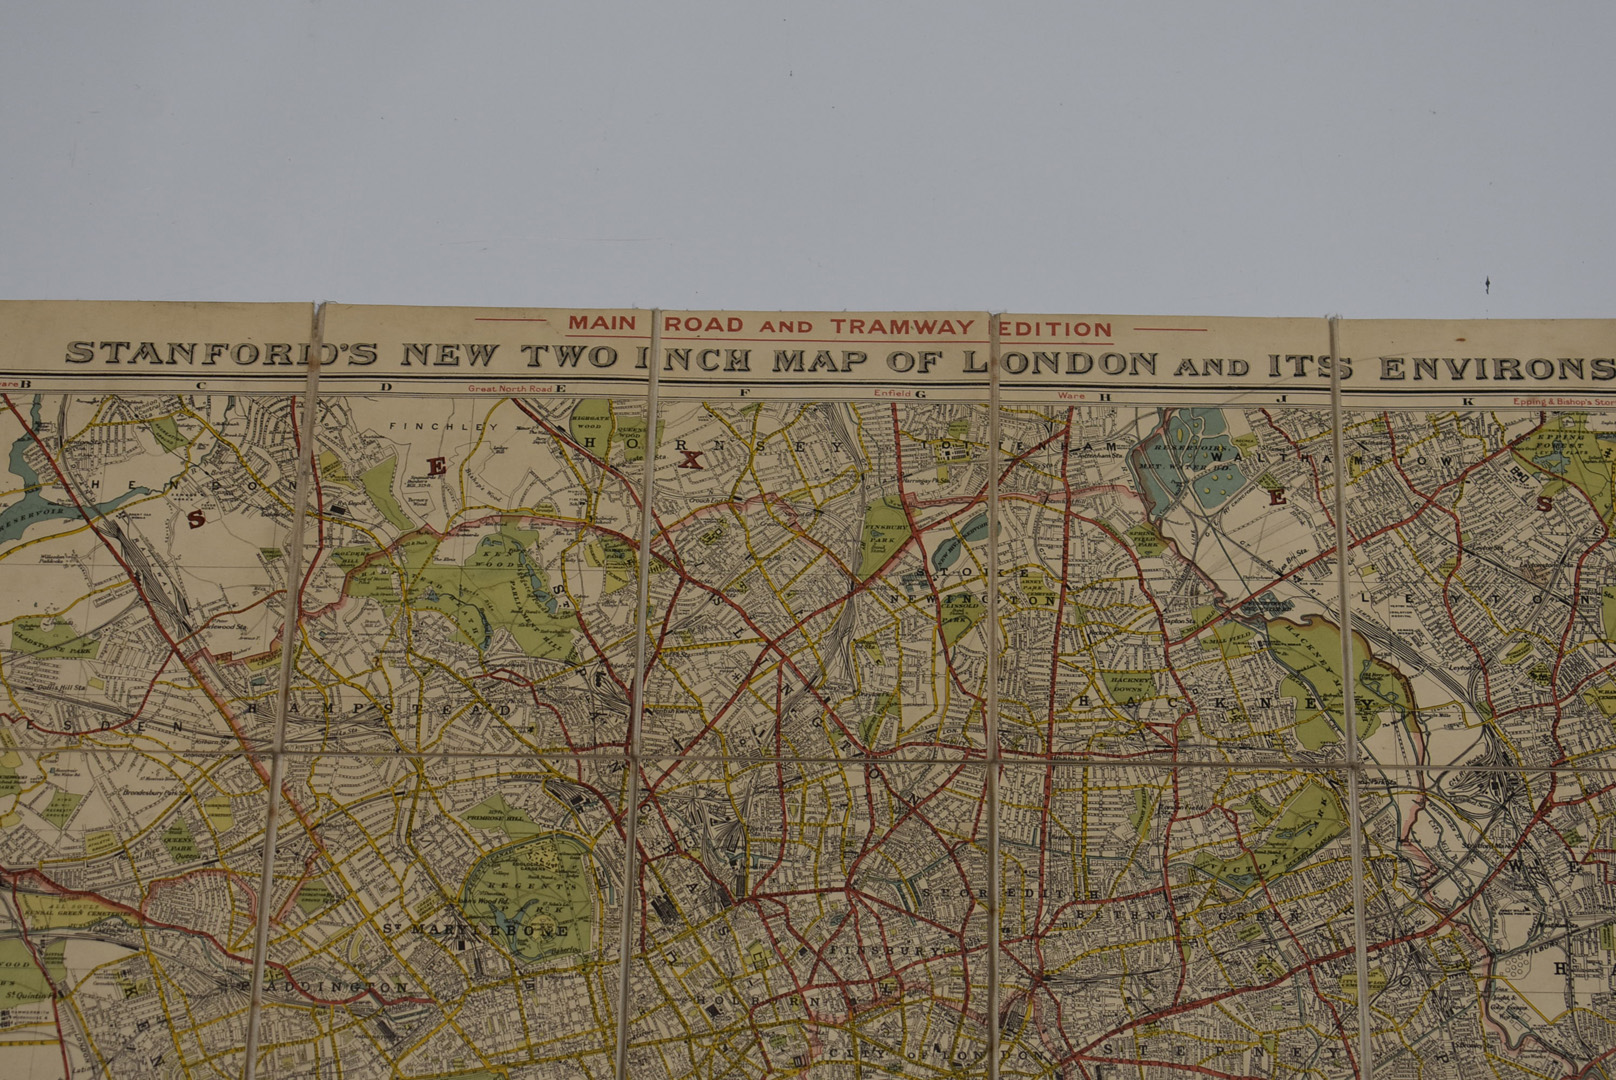 Stanford's New Two Inch Map of London and its Environs - Main Road and Tramline Edition, published - Image 3 of 10